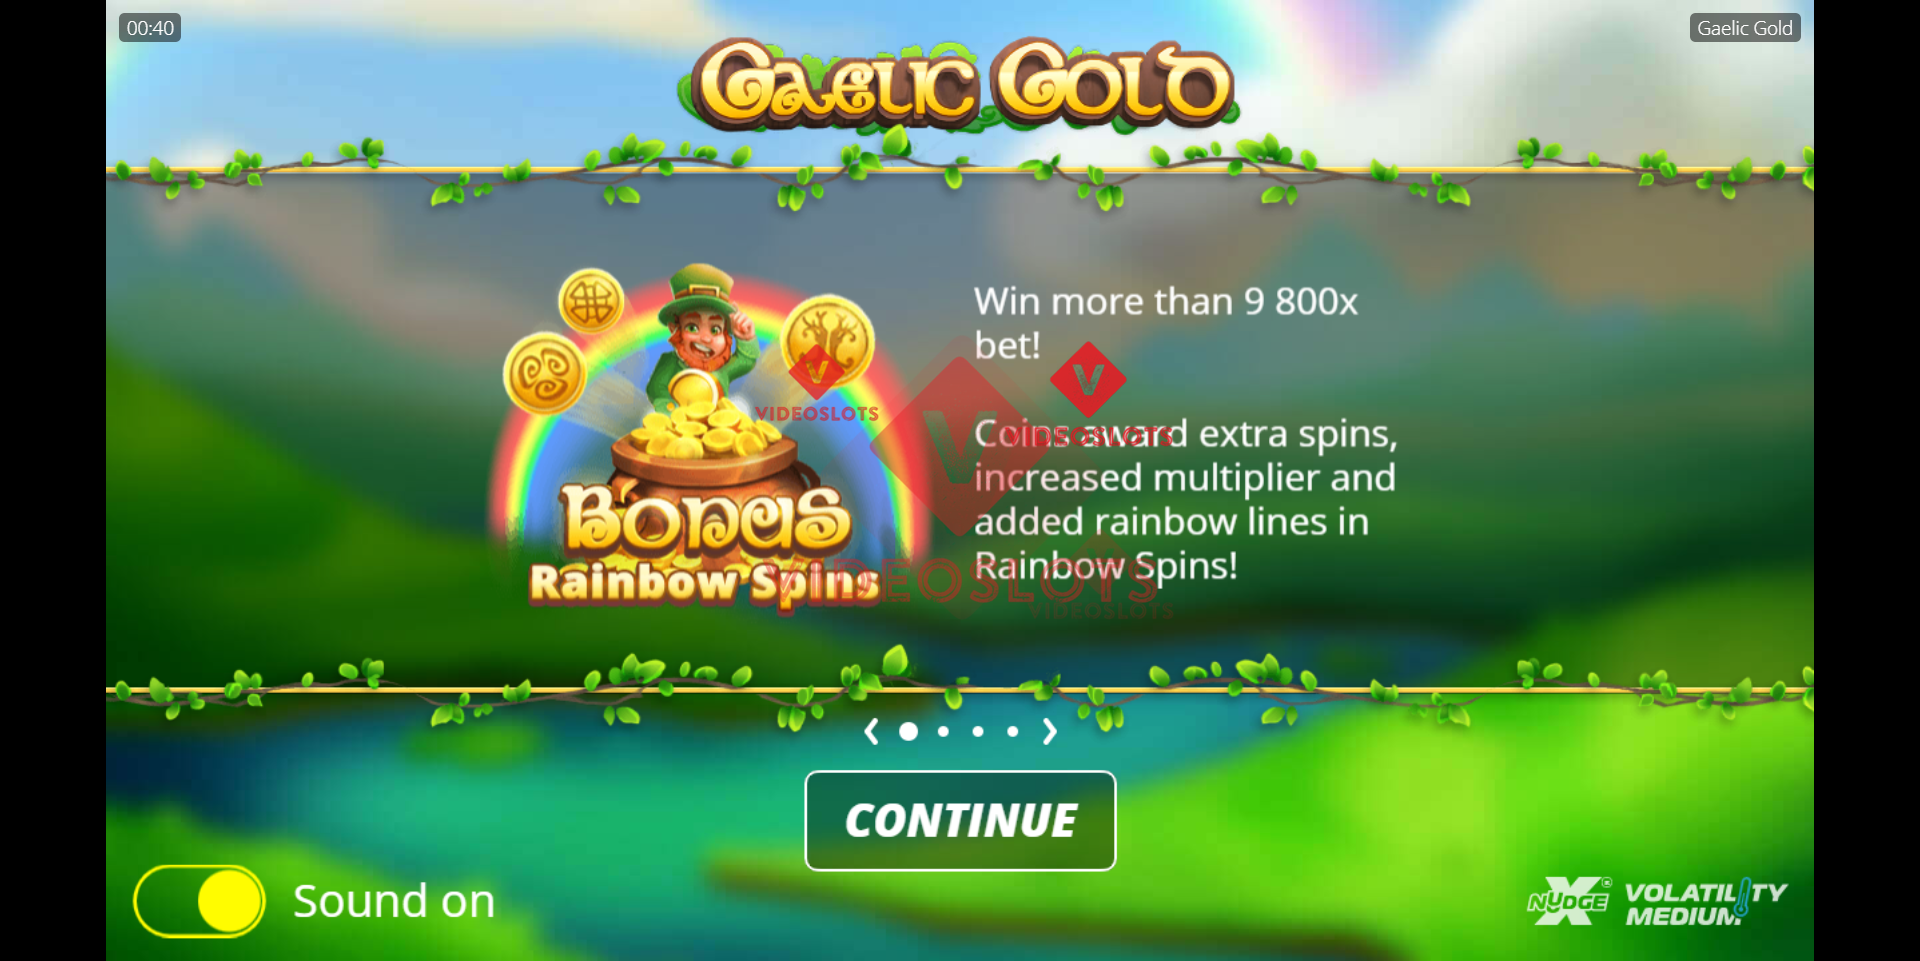 Game Intro for Gaelic Gold slot from NoLimit City